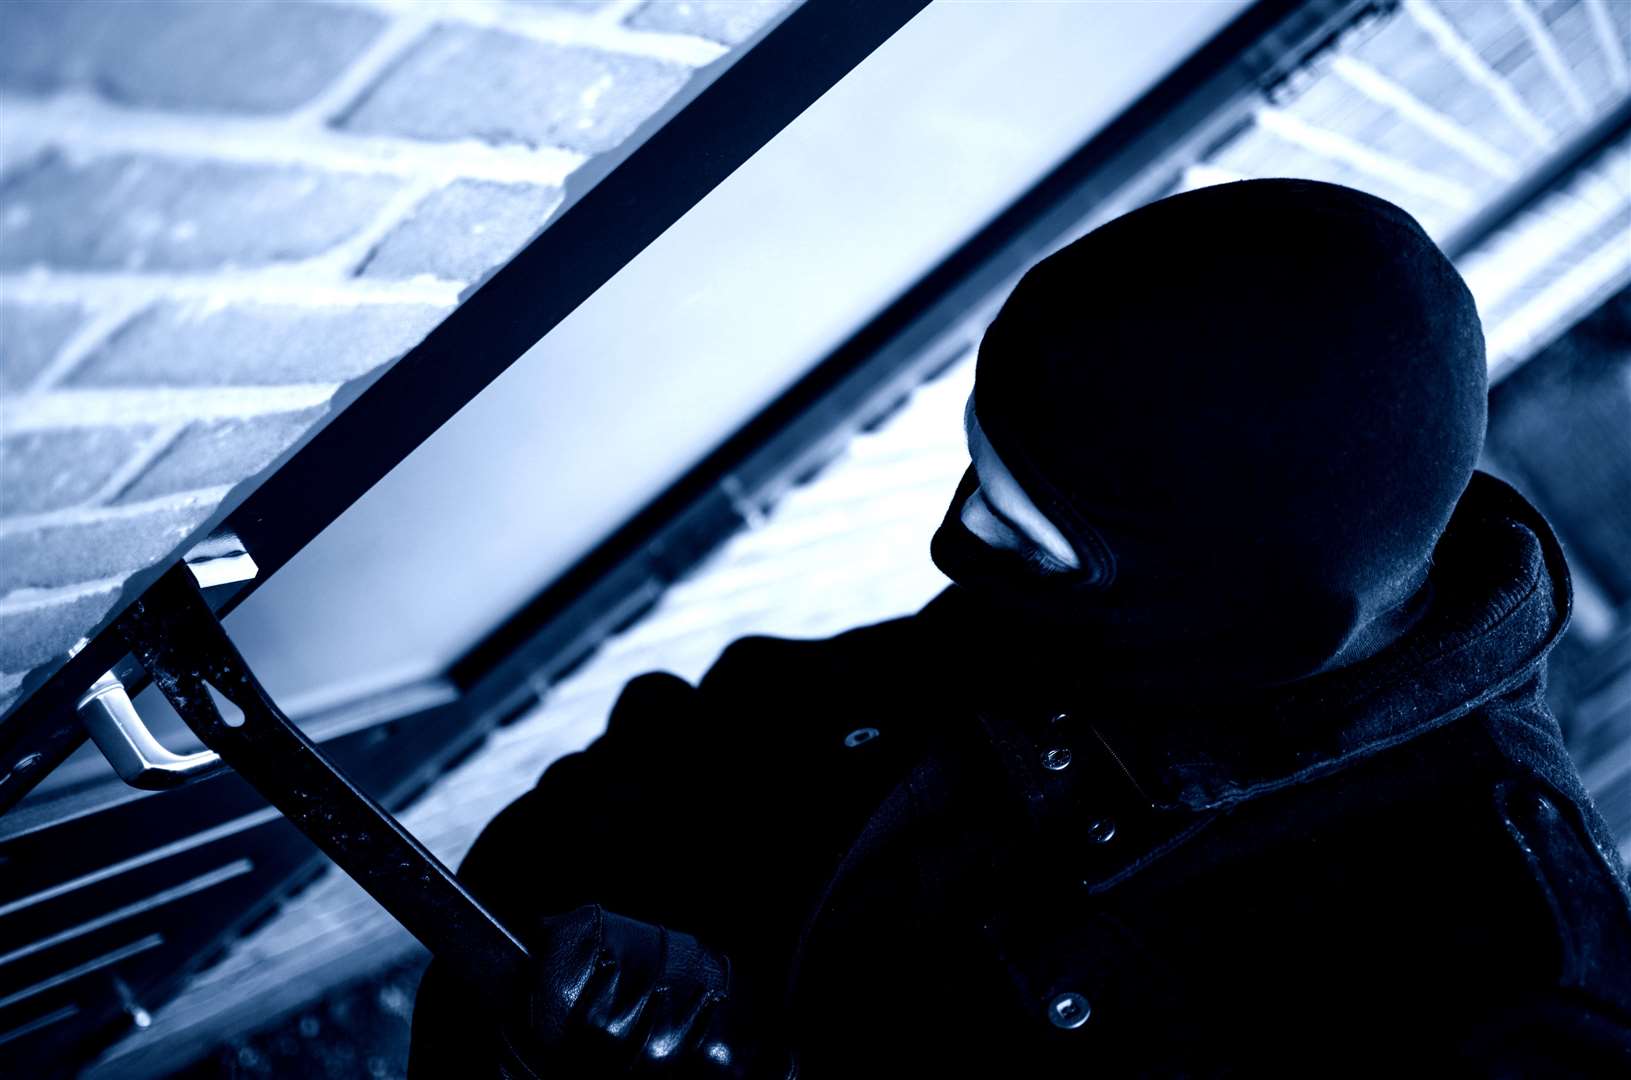 A burglar made off with valuable electronic items during a break-in at a Chatham home. Stock image